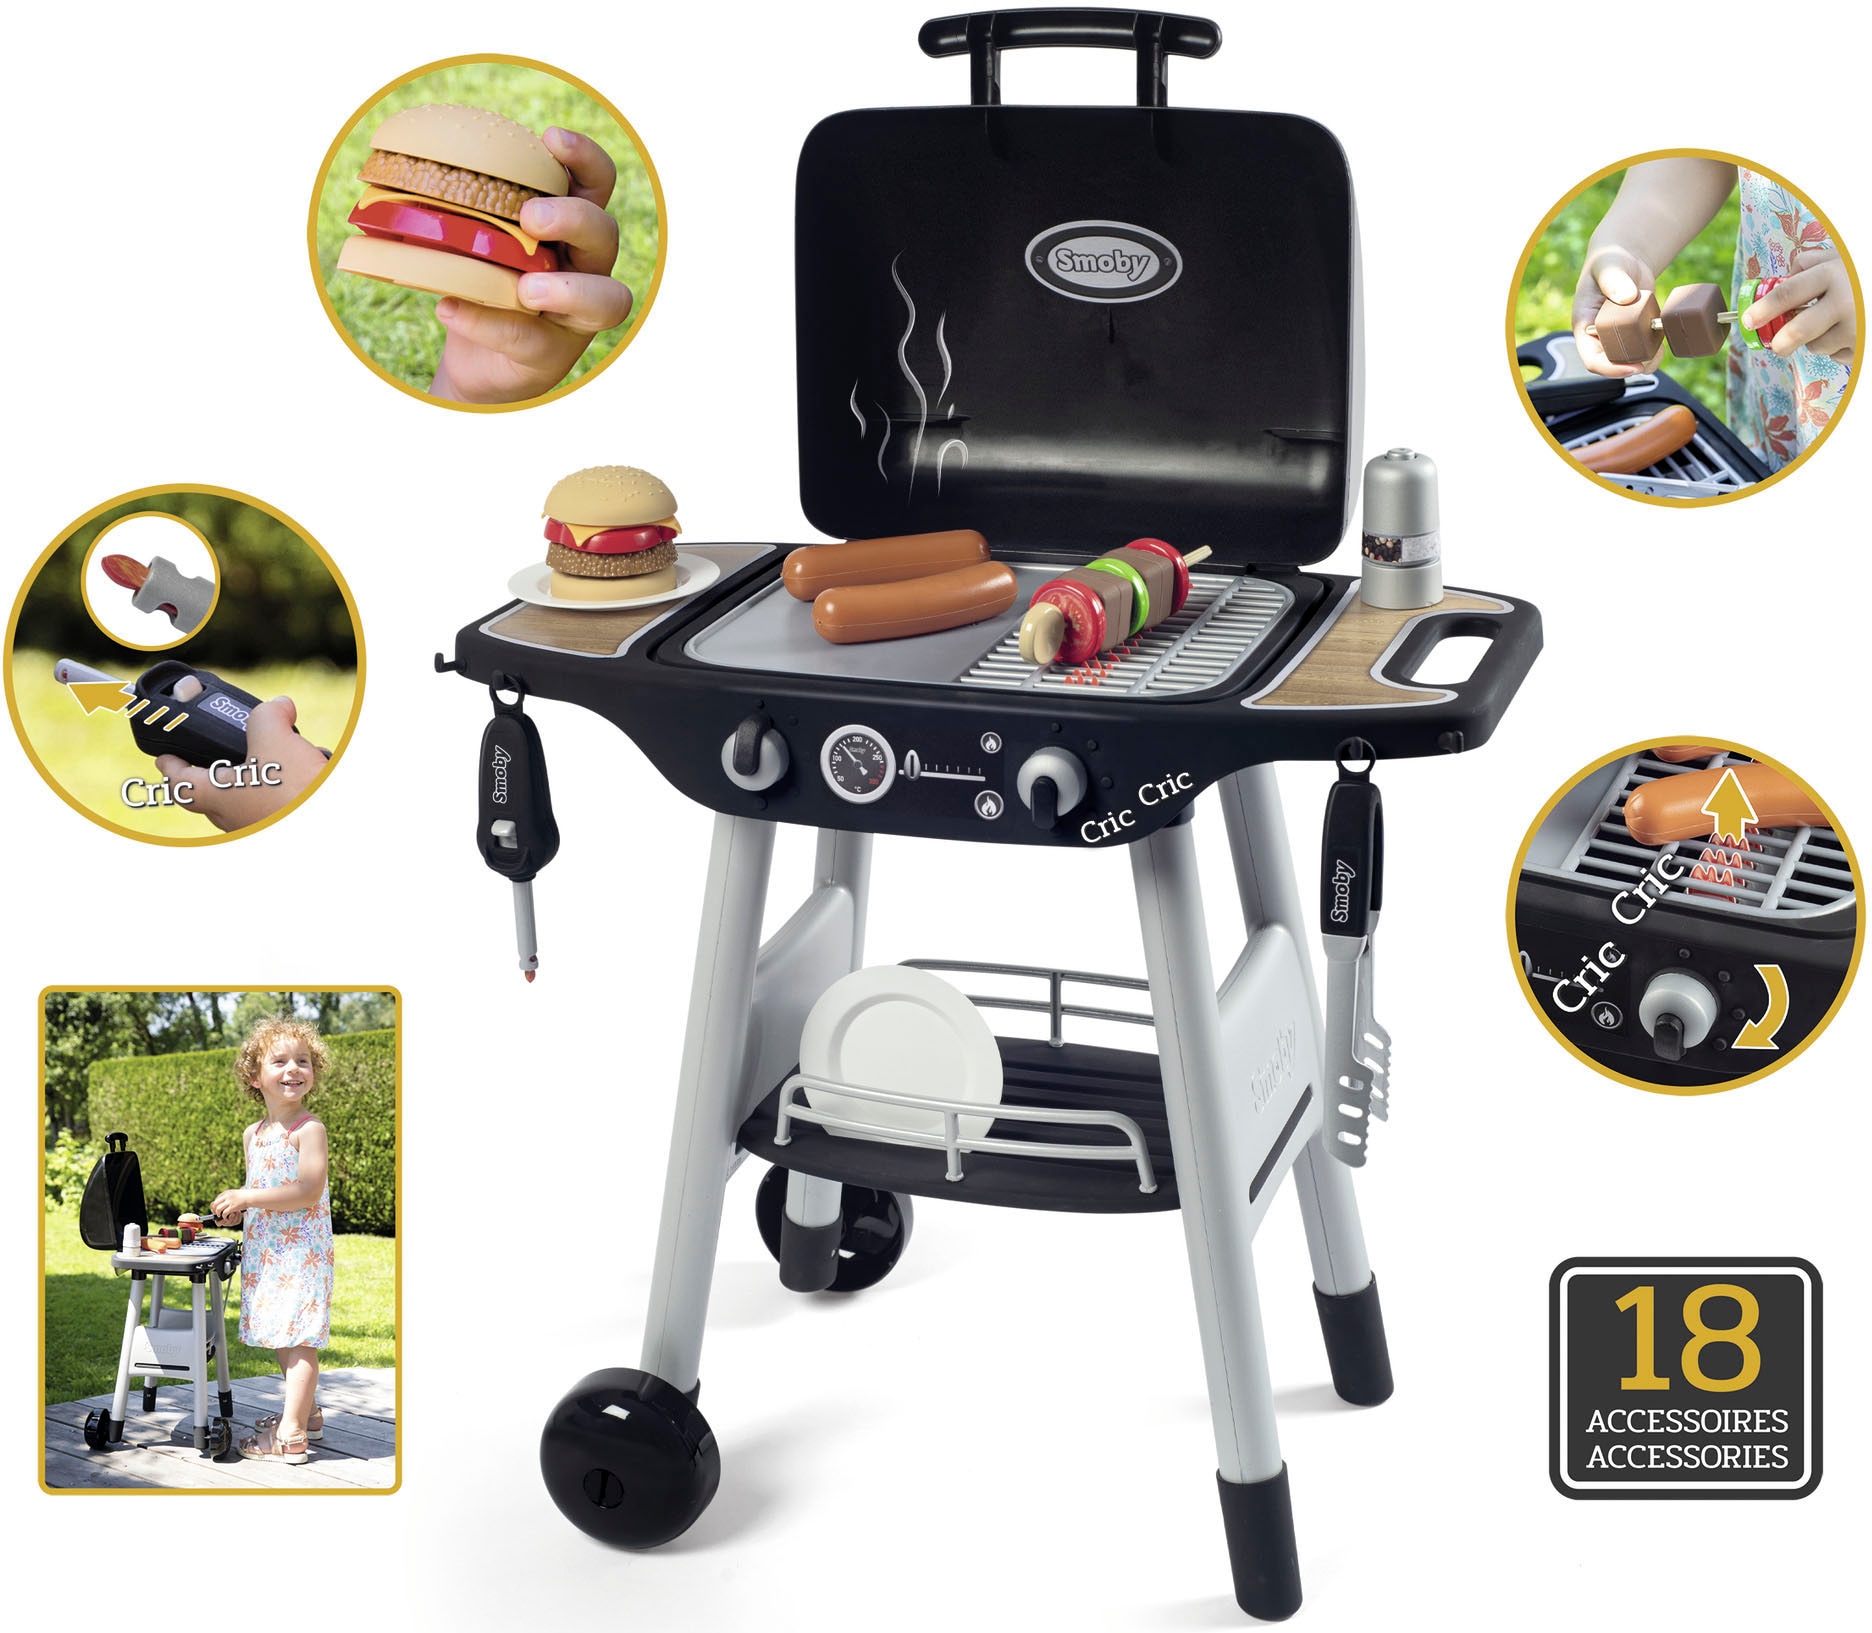 Smoby Kinder-Grill »Barbecue«, Made in Europe